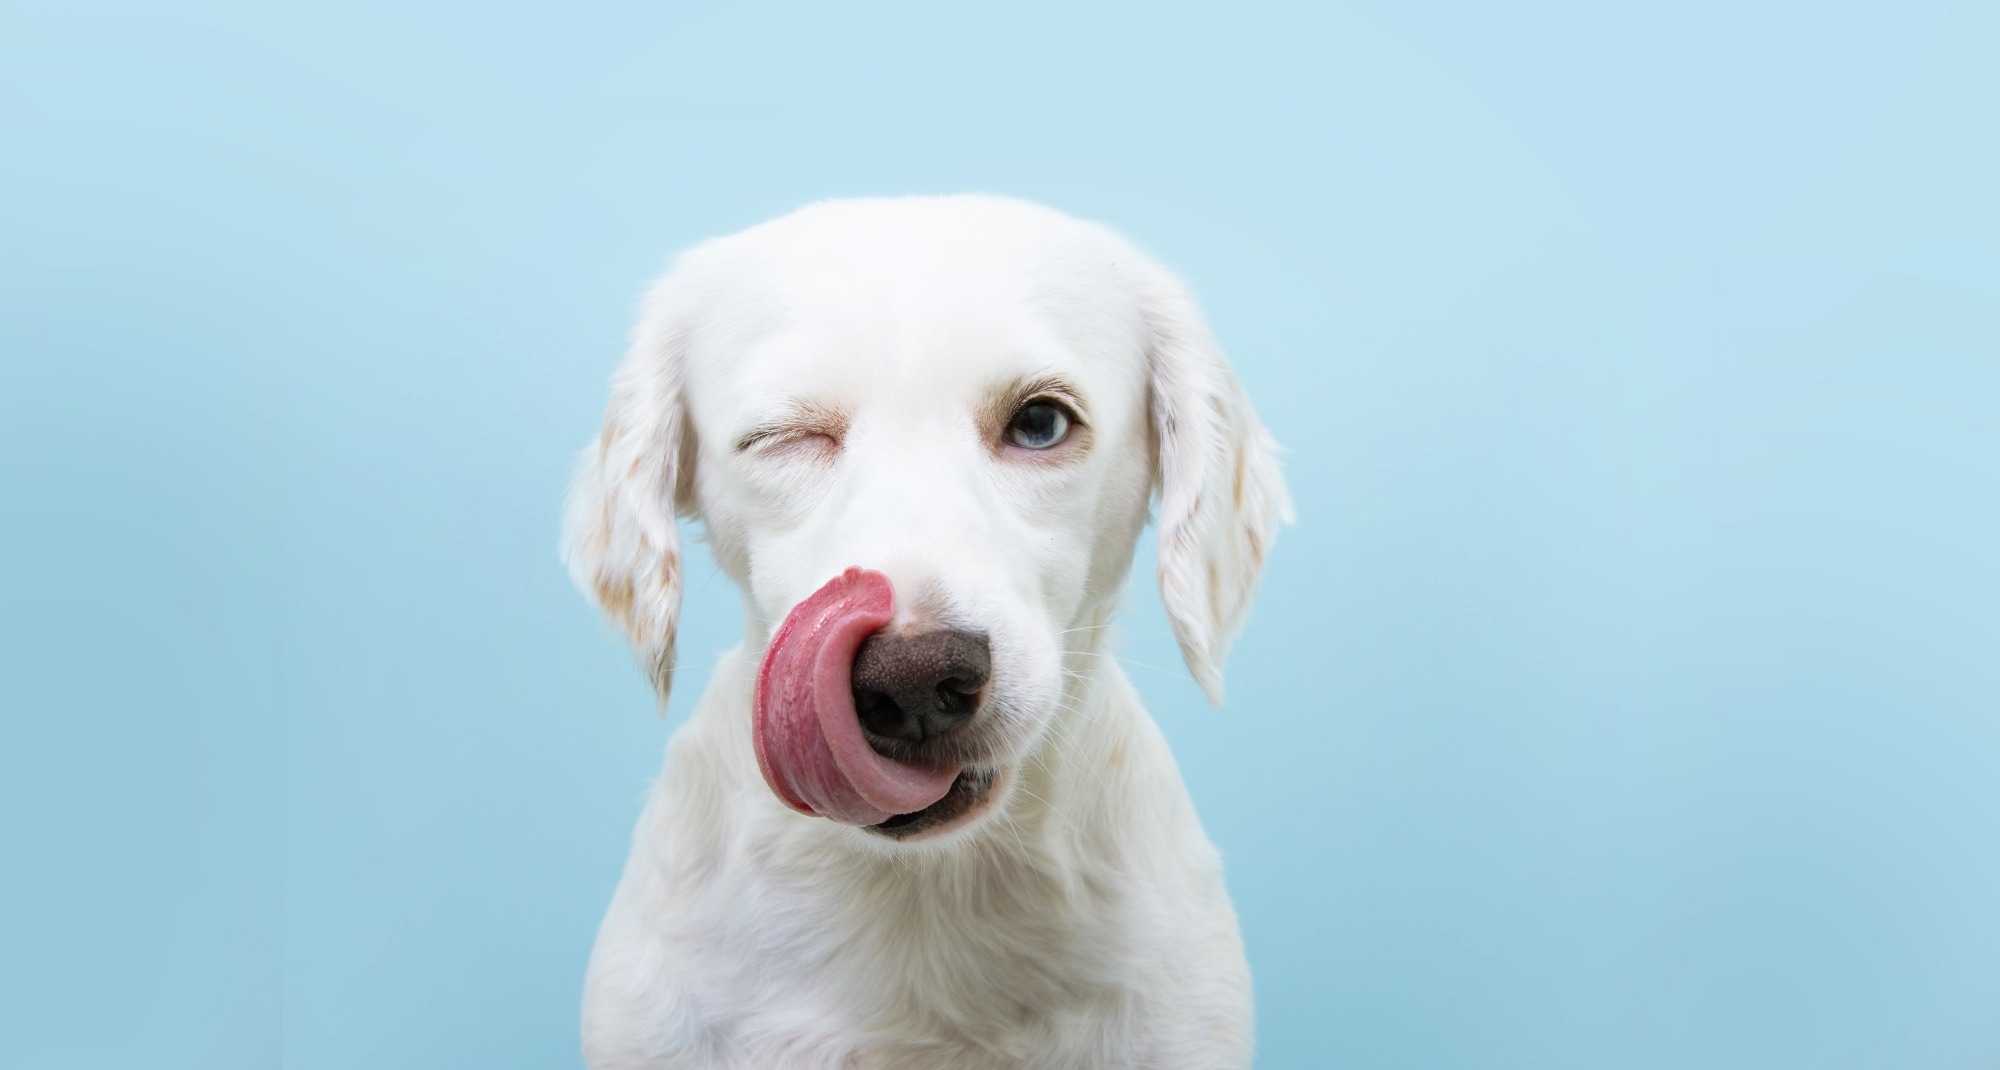 Study: Dogs can discriminate between human baseline and psychological stress condition odours. Image Credit: smrm1977/Shutterstock